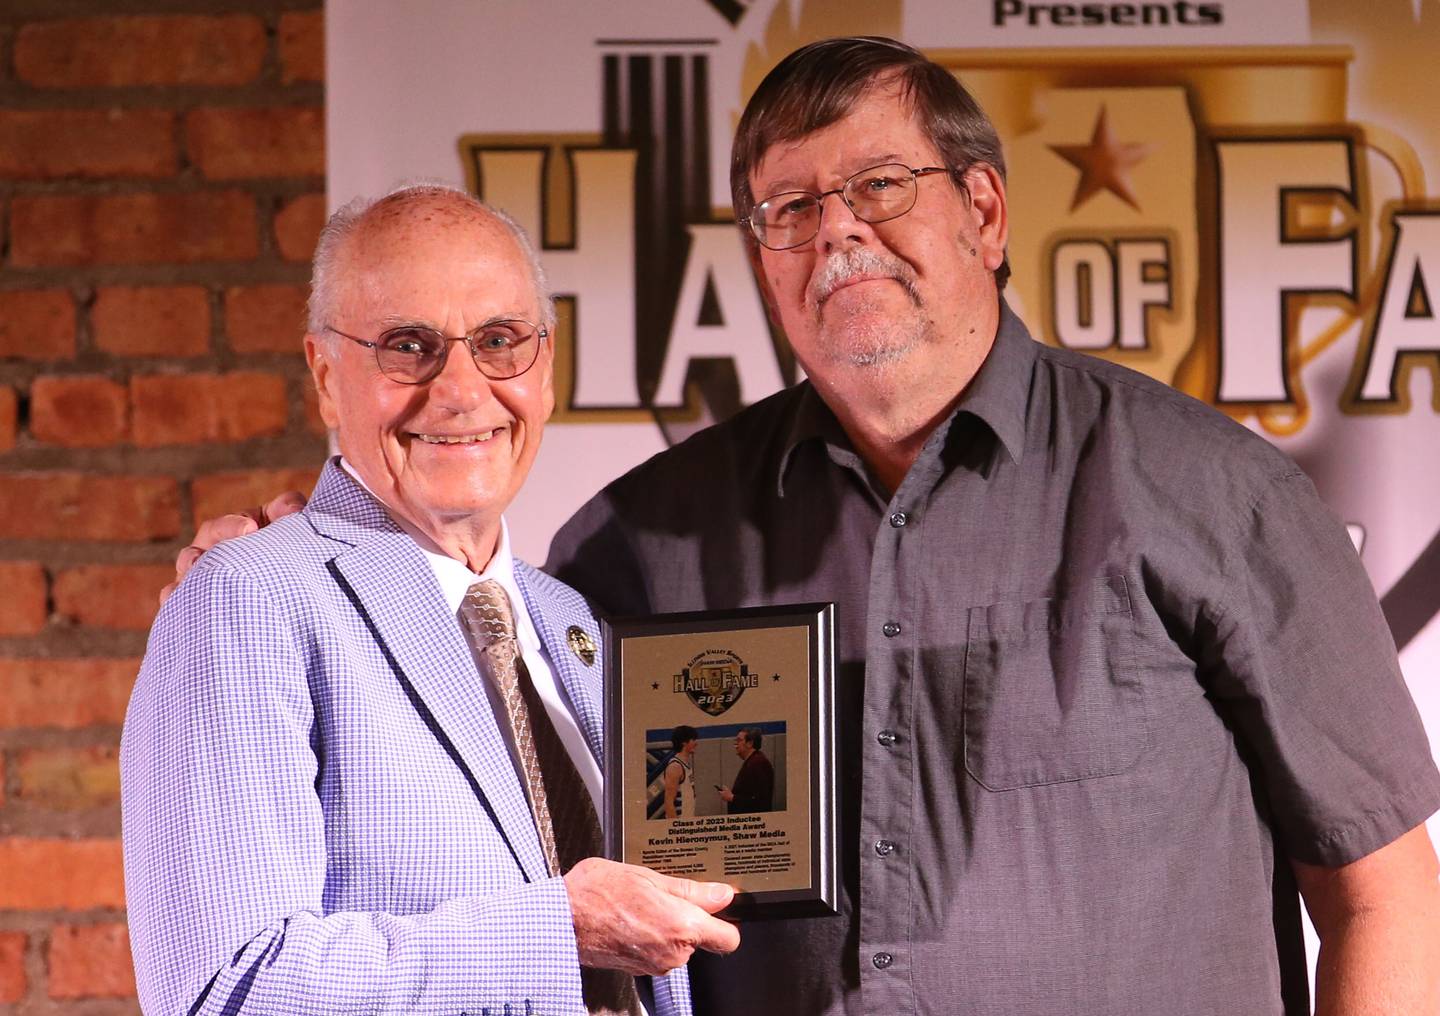 Lanny Slevin Emcee, presents the Shaw Media distinguished media award to Bureau County sports editor Kevin Hieronymus during the Shaw Media Illinois Valley Sports Hall of Fame on Thursday, June 8, 2023 at the Auditorium Ballroom in La Salle.